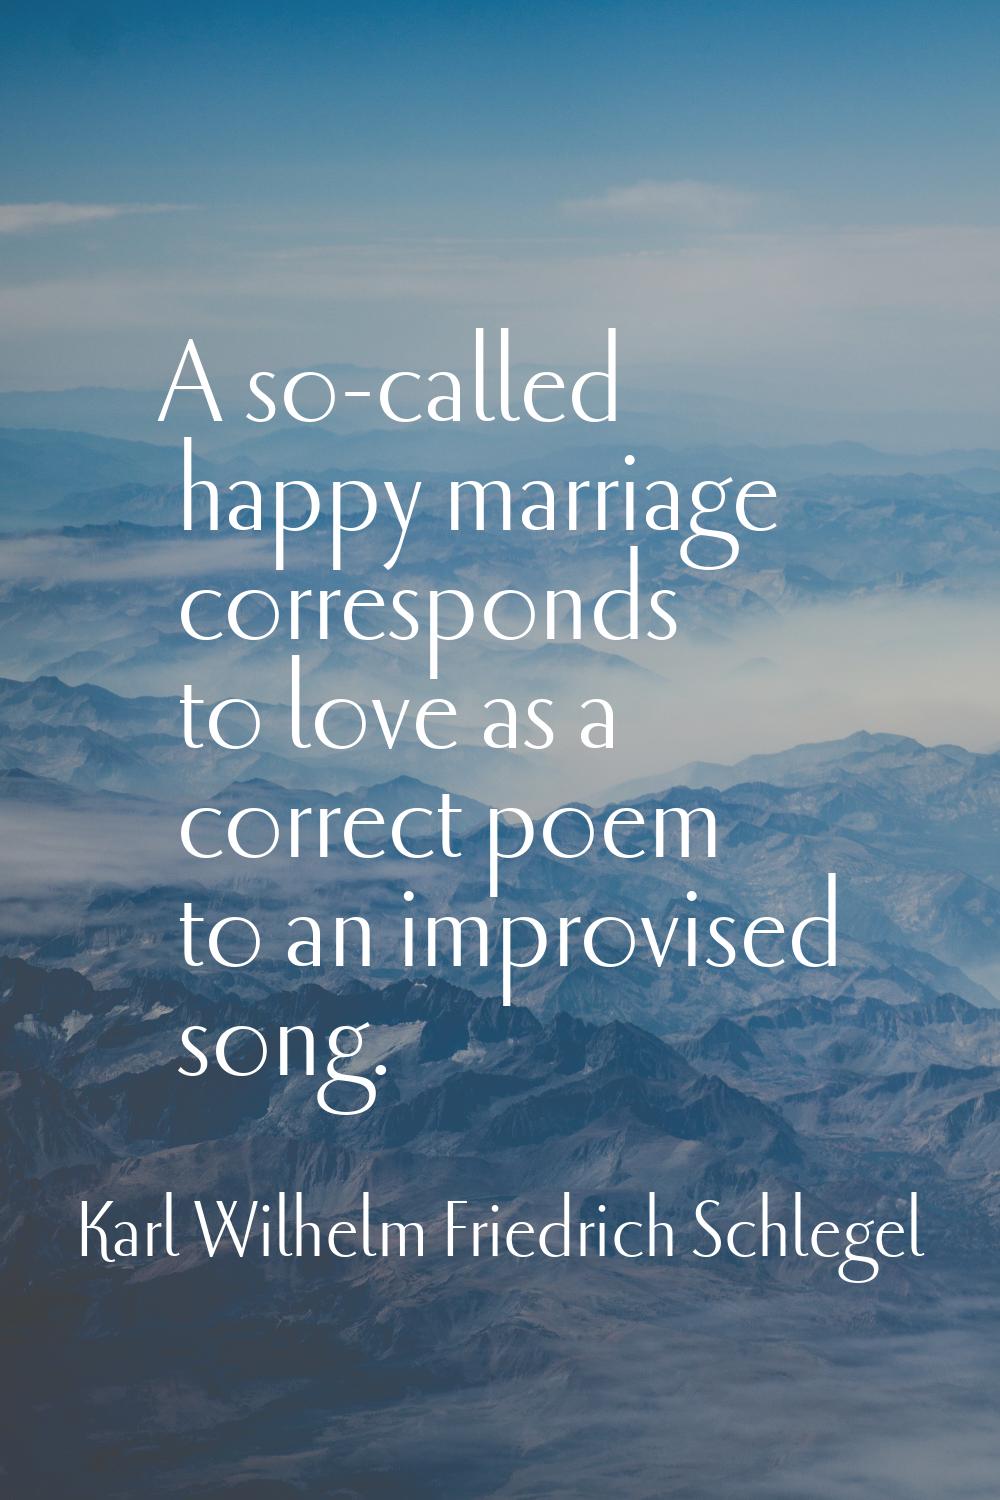 A so-called happy marriage corresponds to love as a correct poem to an improvised song.